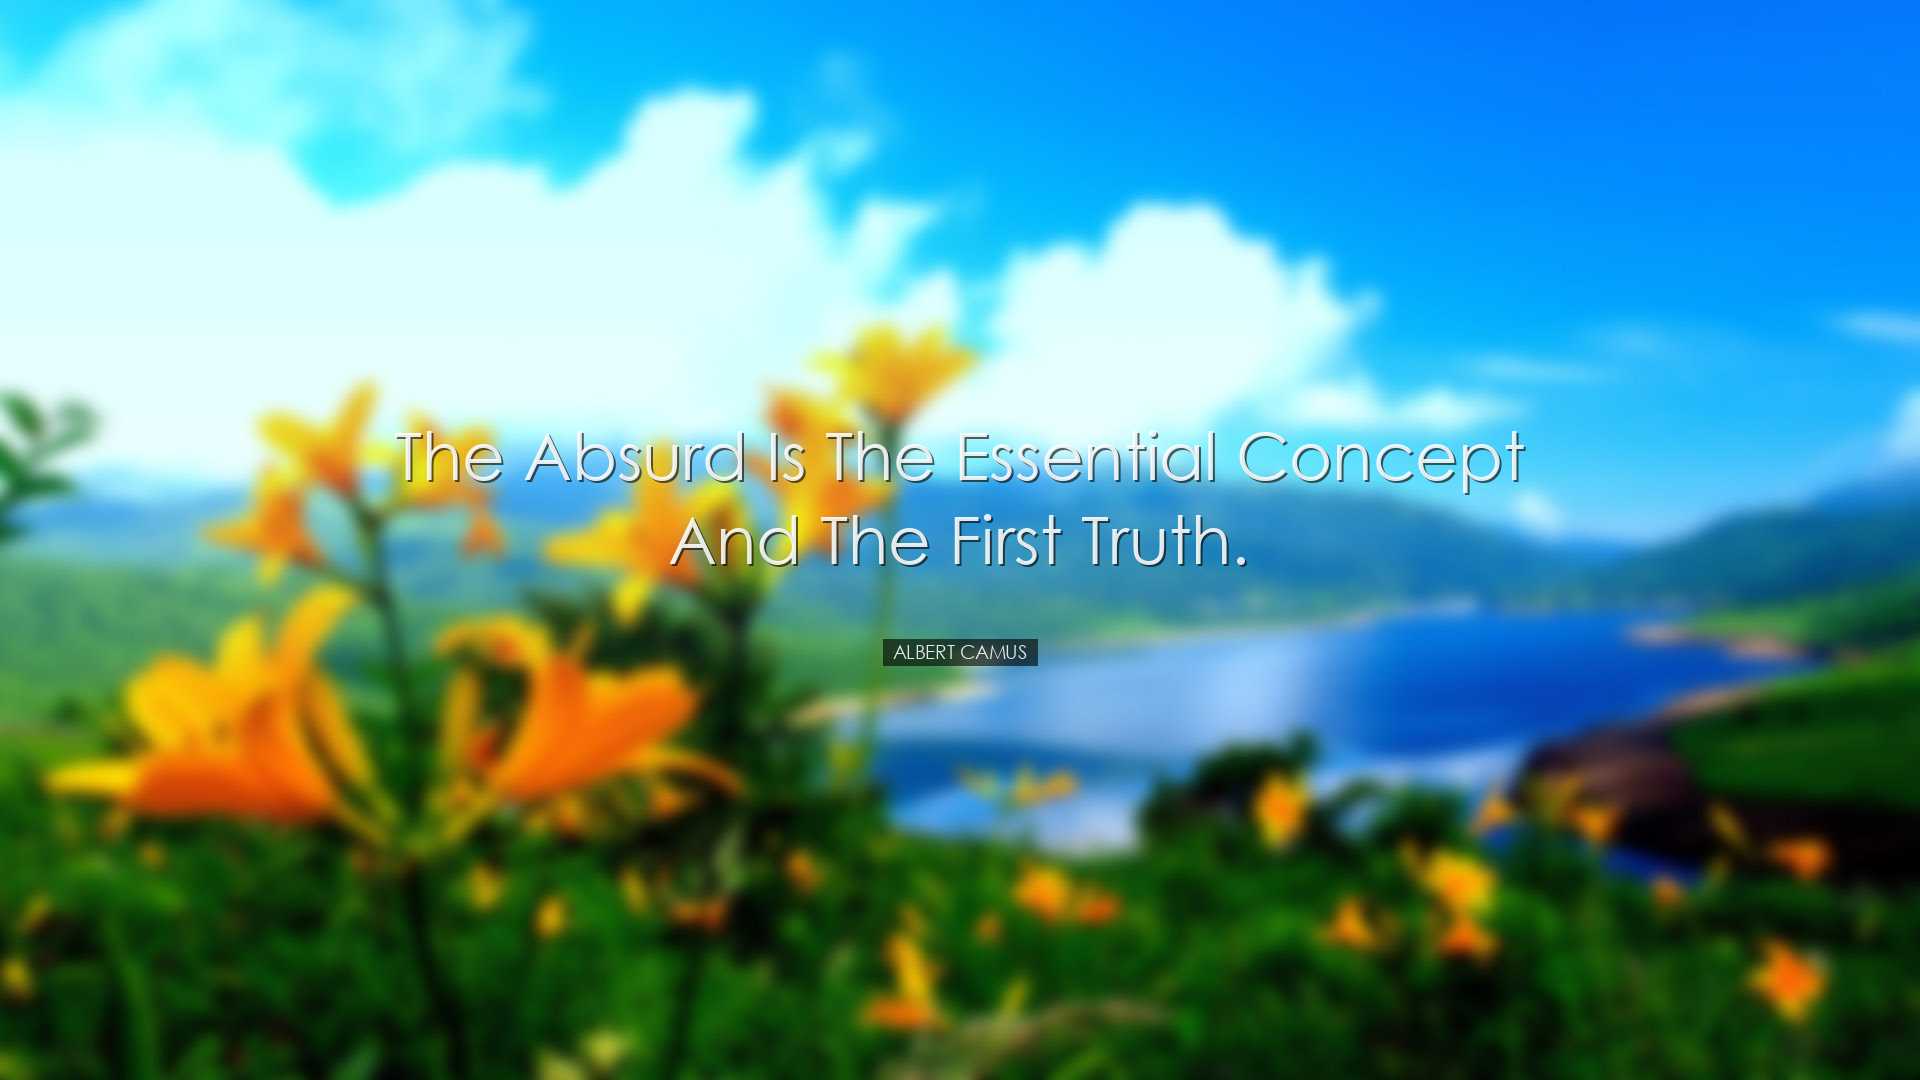 The absurd is the essential concept and the first truth. - Albert